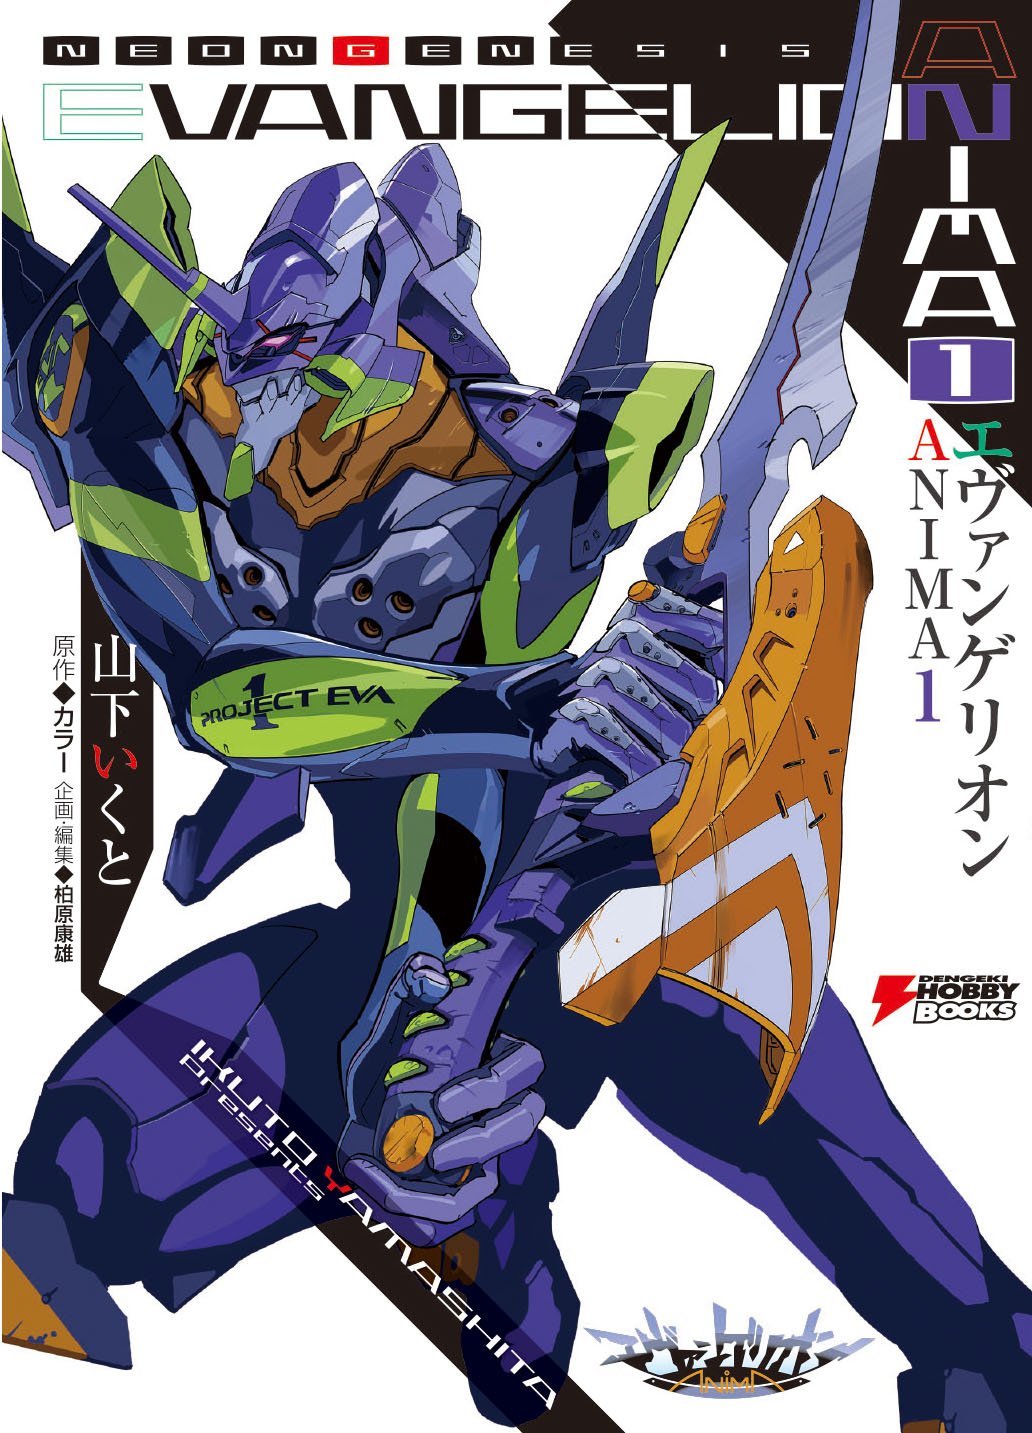 What's the best Unit-01 model kit? - EvaGeeks.org Forum - an